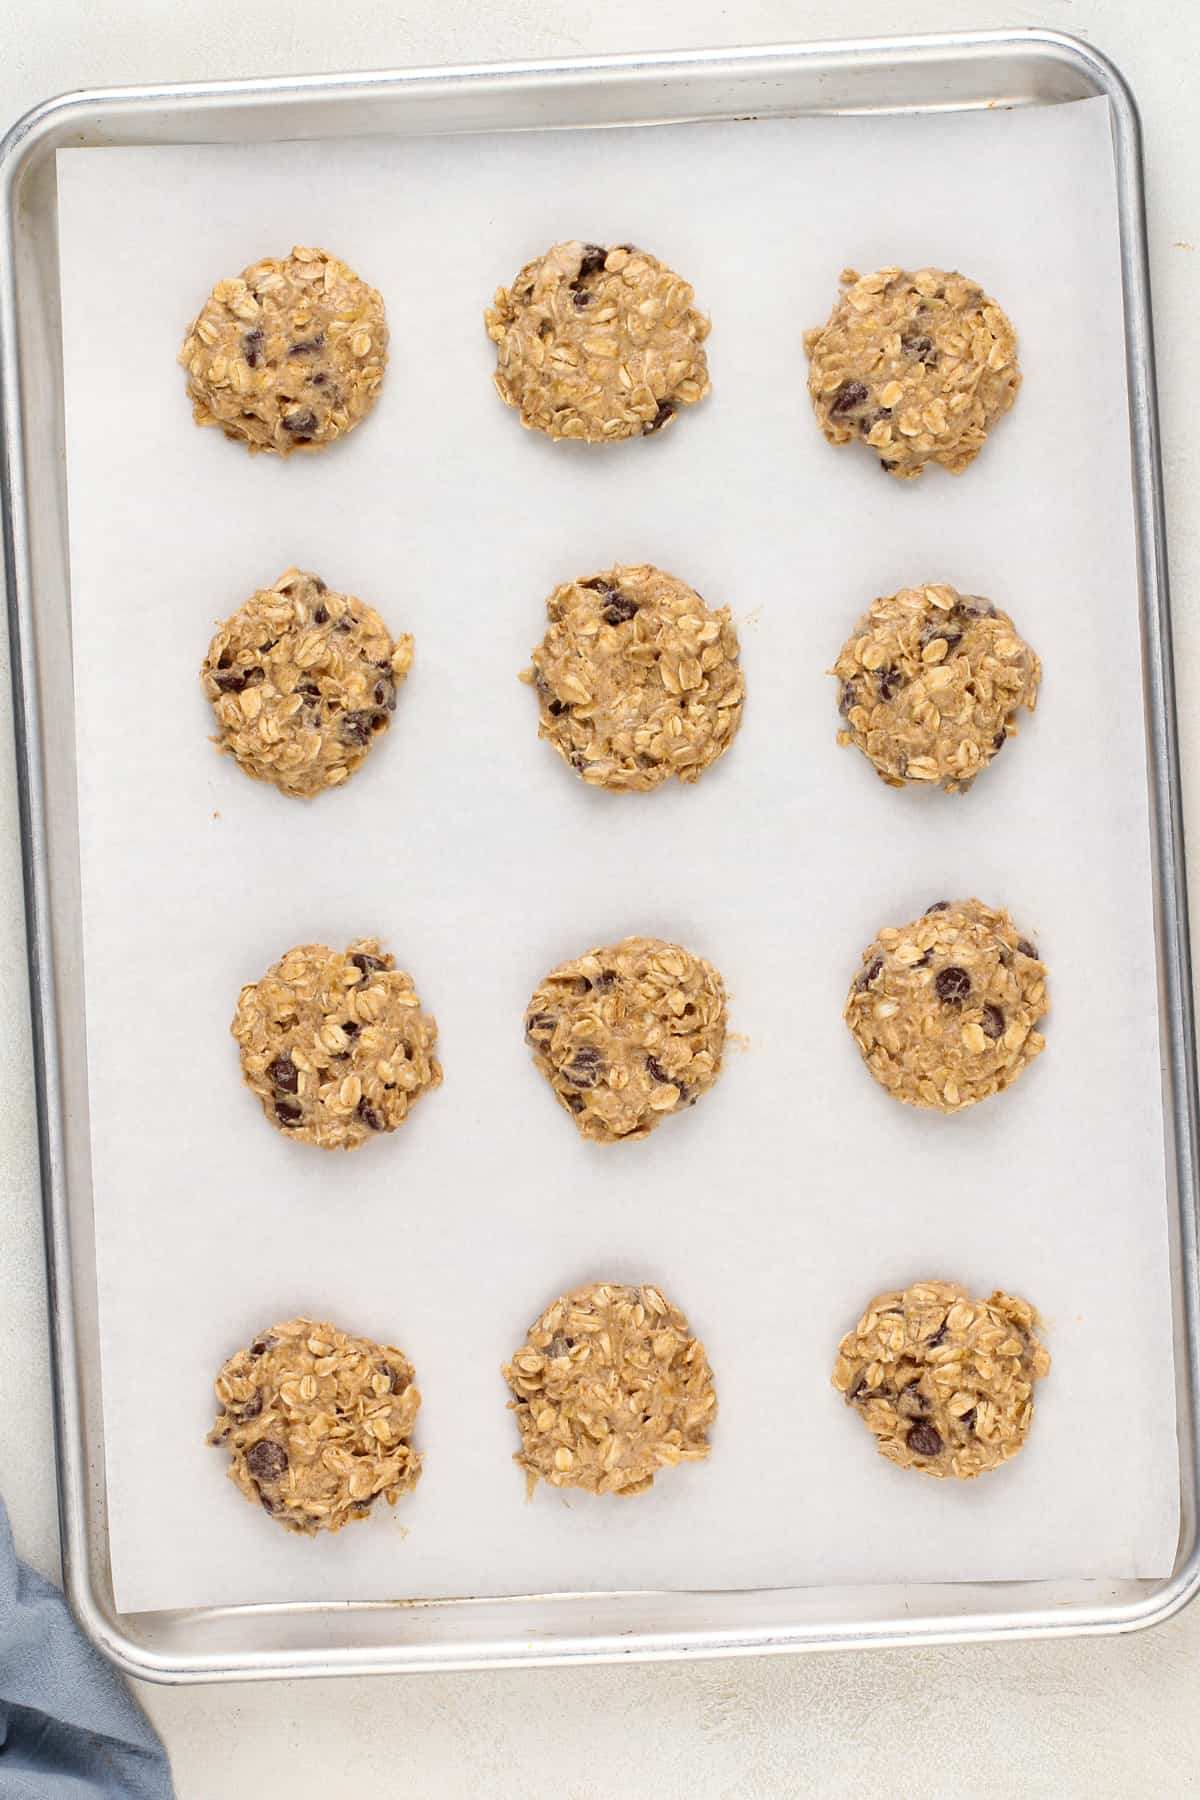 Unbaked banana oatmeal cookies on a parchment-lined baking sheet.